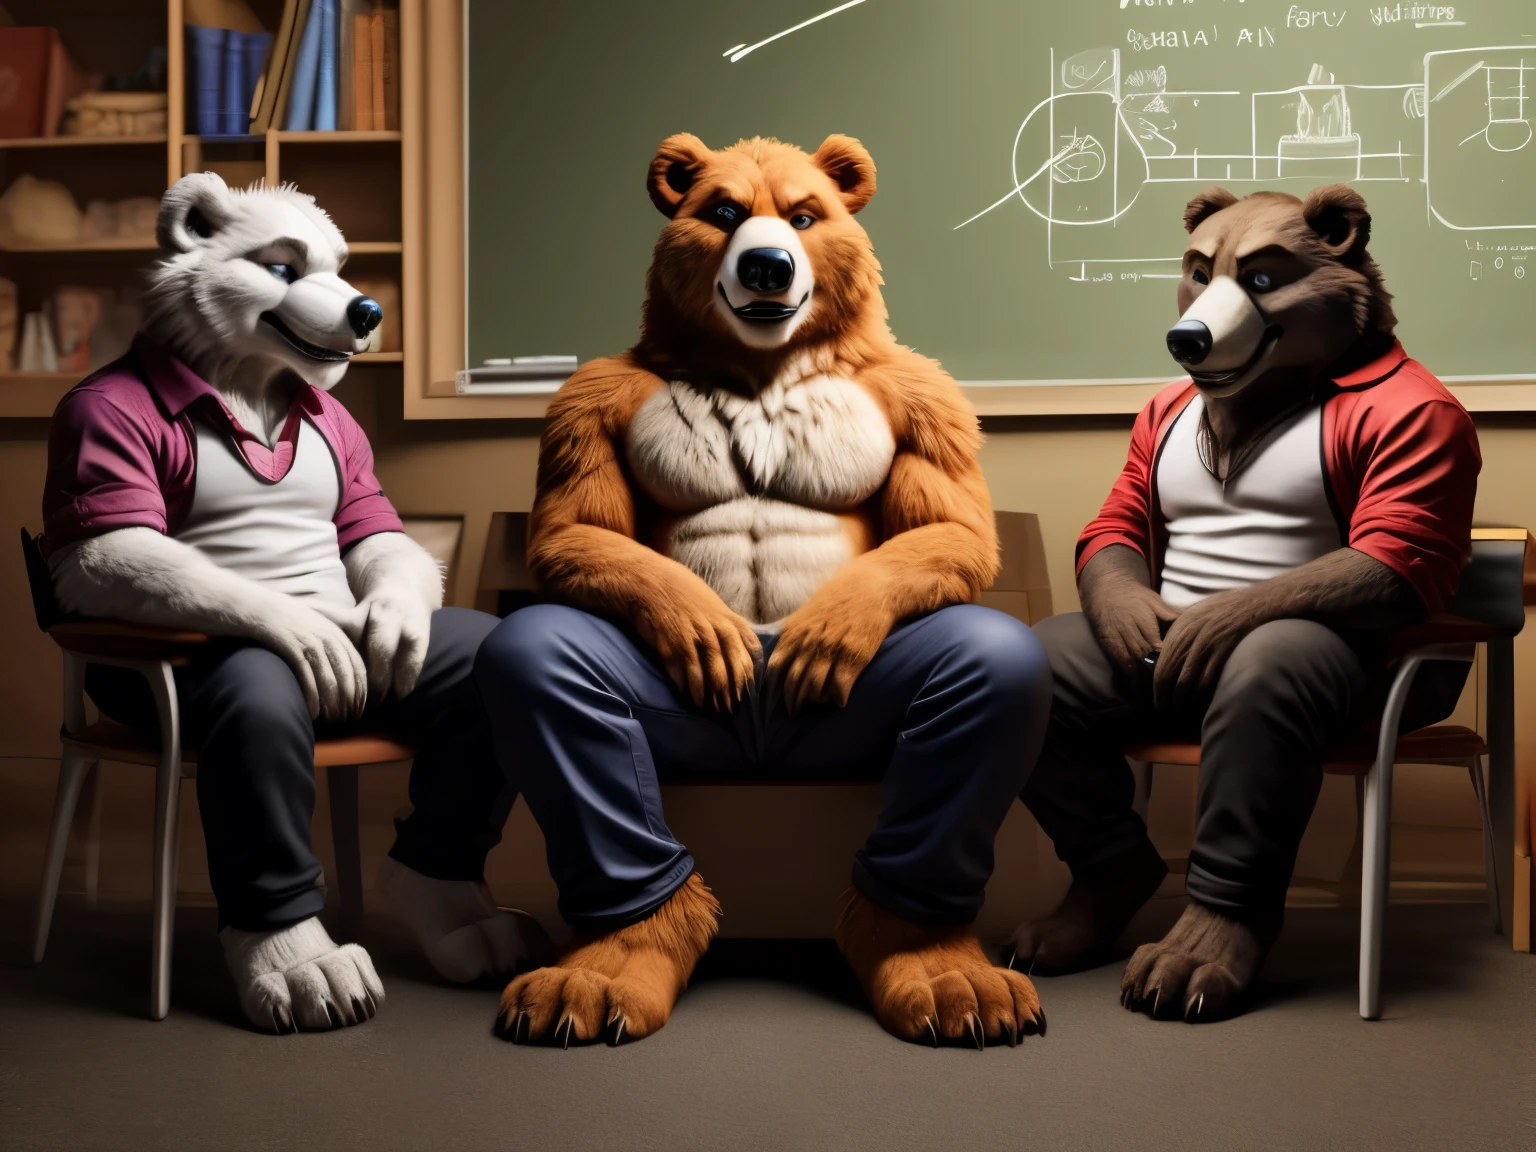 A group of young school furry (fox, huskey, bear etc.) boys with long pants, barefoot and entranced, sit in a classroom under the watchful gaze of their evil teacher. Their minds have been twisted and manipulated, as they sit, drooling and mesmerized, their nice paws with short claws twitching. The green glow in their eyes a clear indication of their brainwashed state.